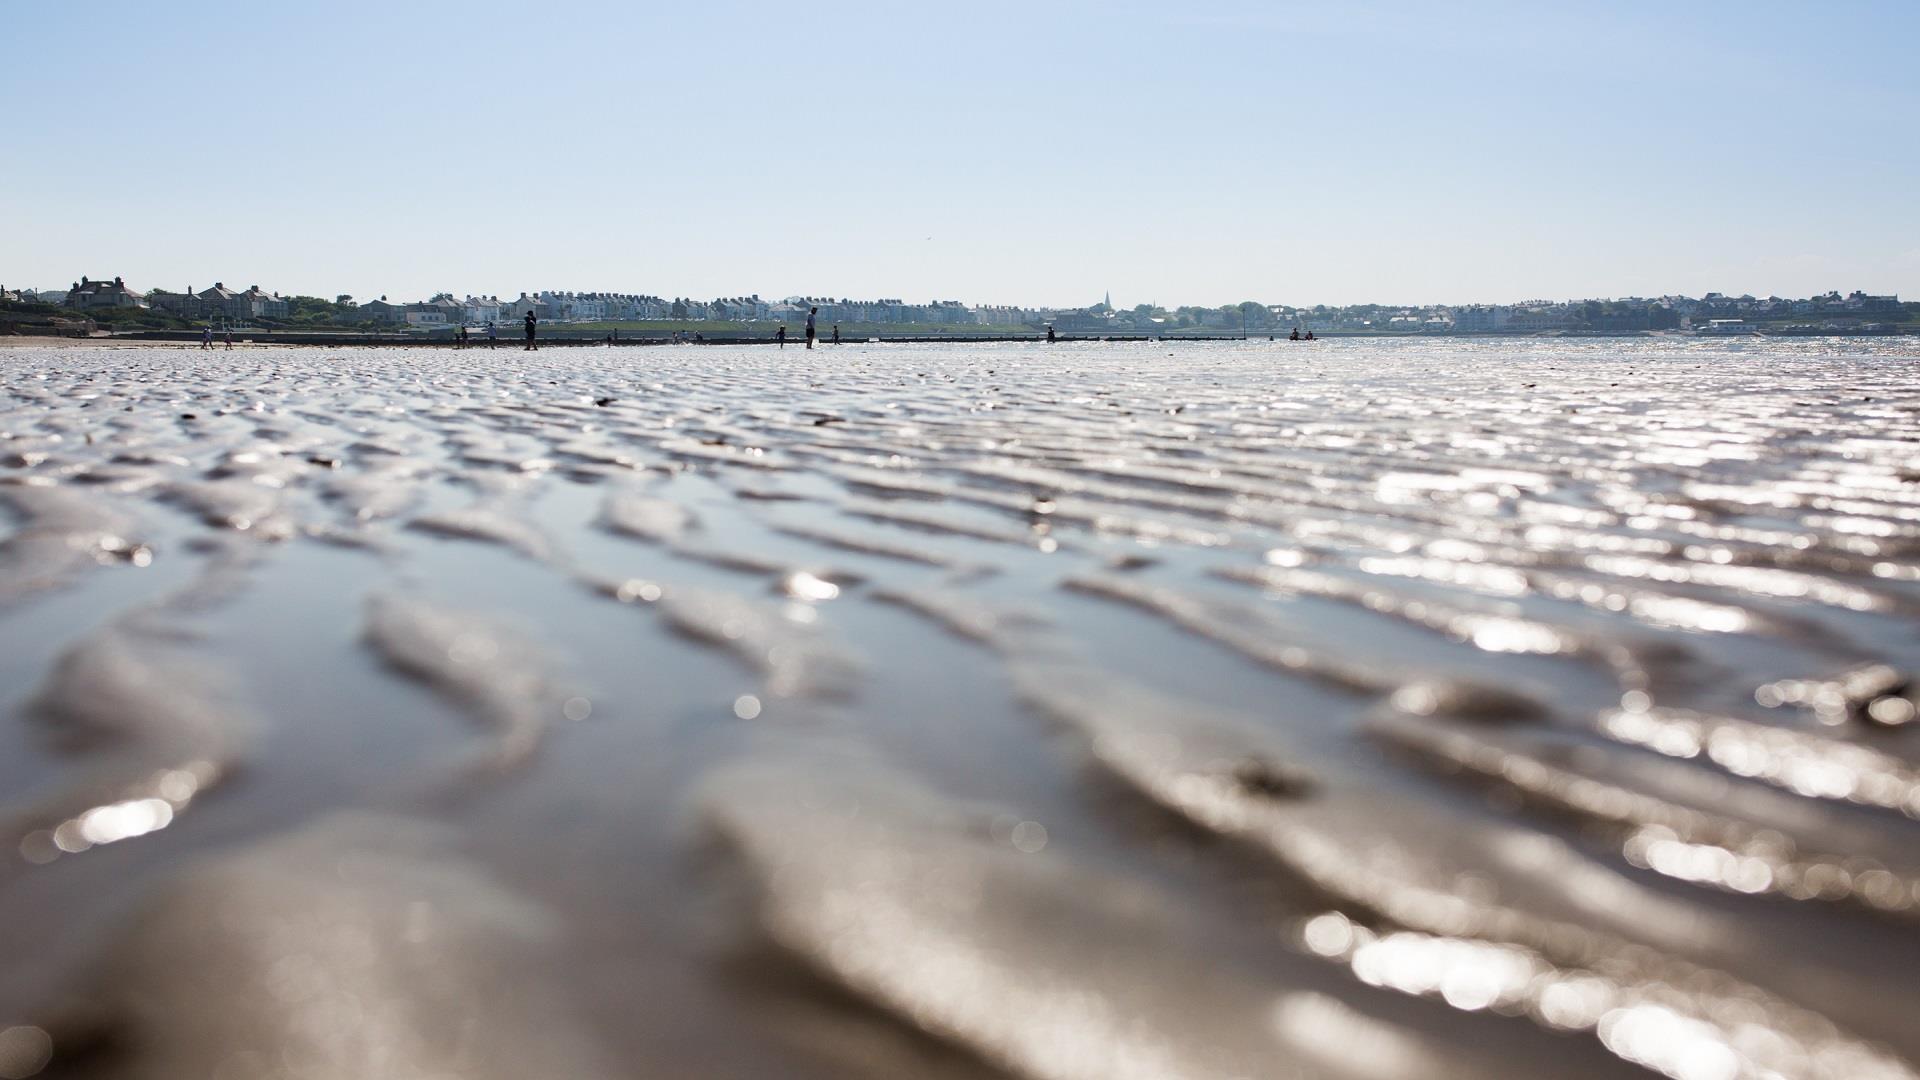 Close up photo of the ripples of sand on Ballyholme Beach with the promenade and bathers in backdrop